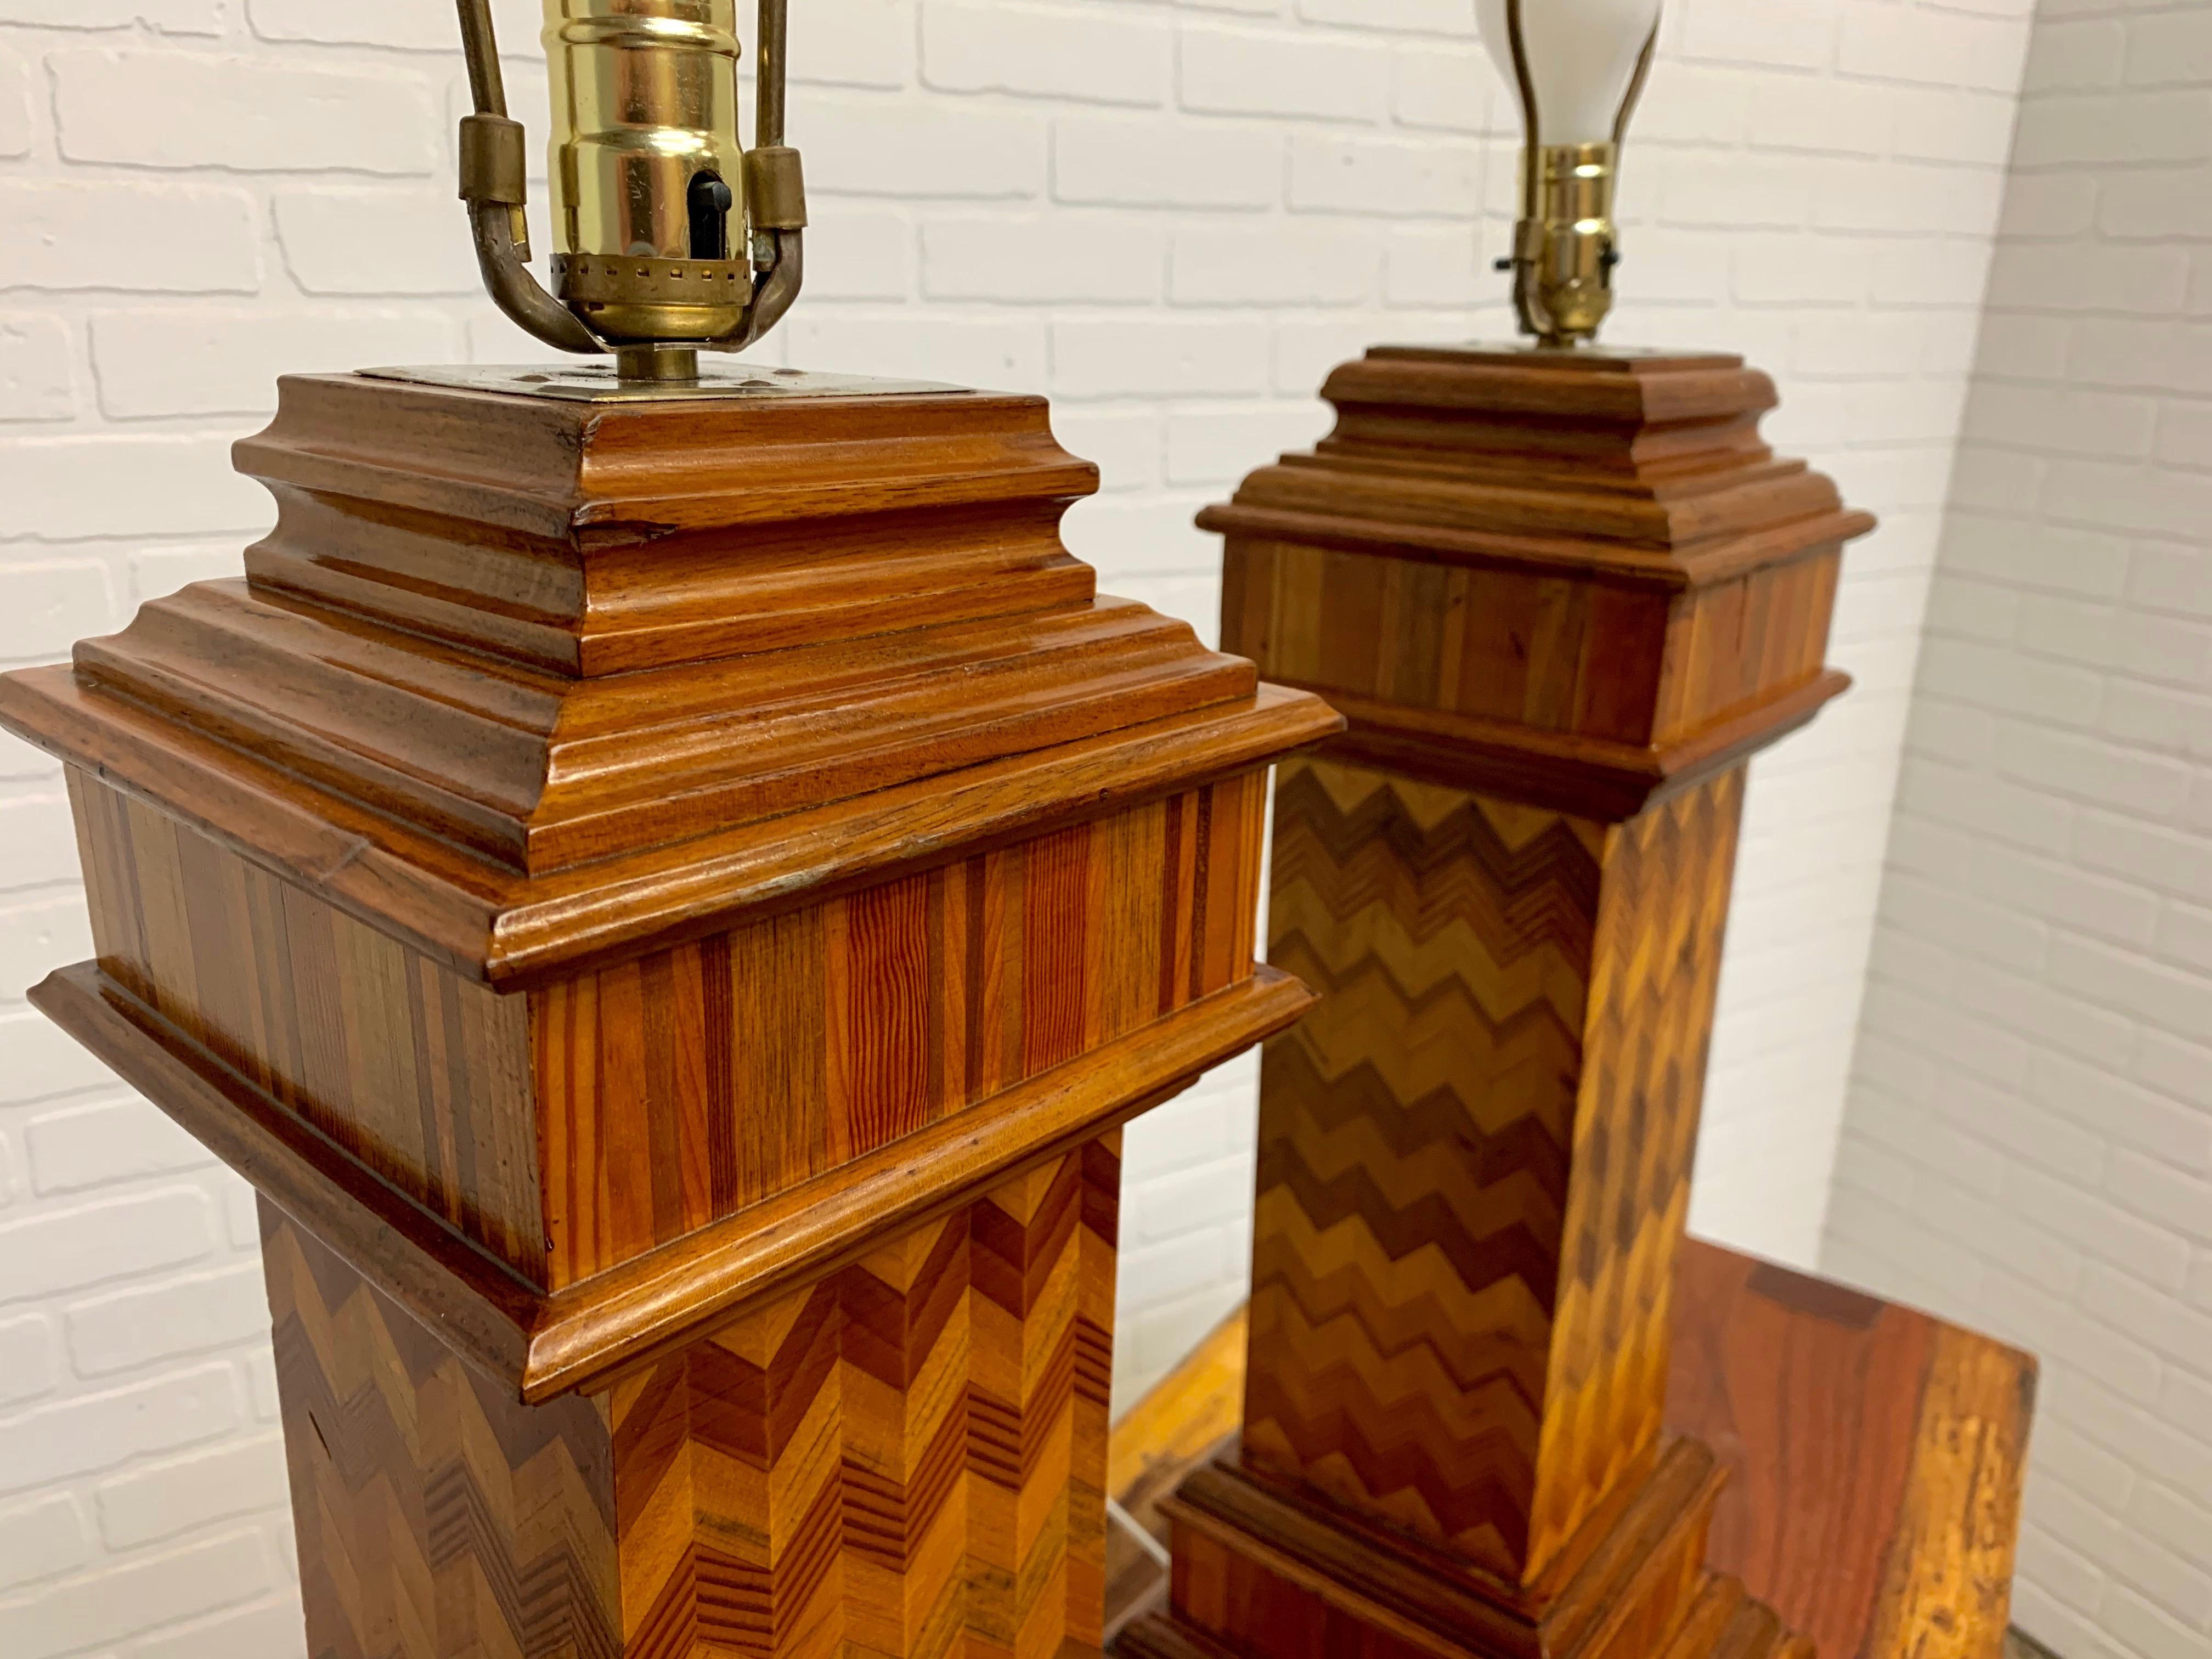 Antique Wood Lamps Made of Architectural Elements 2